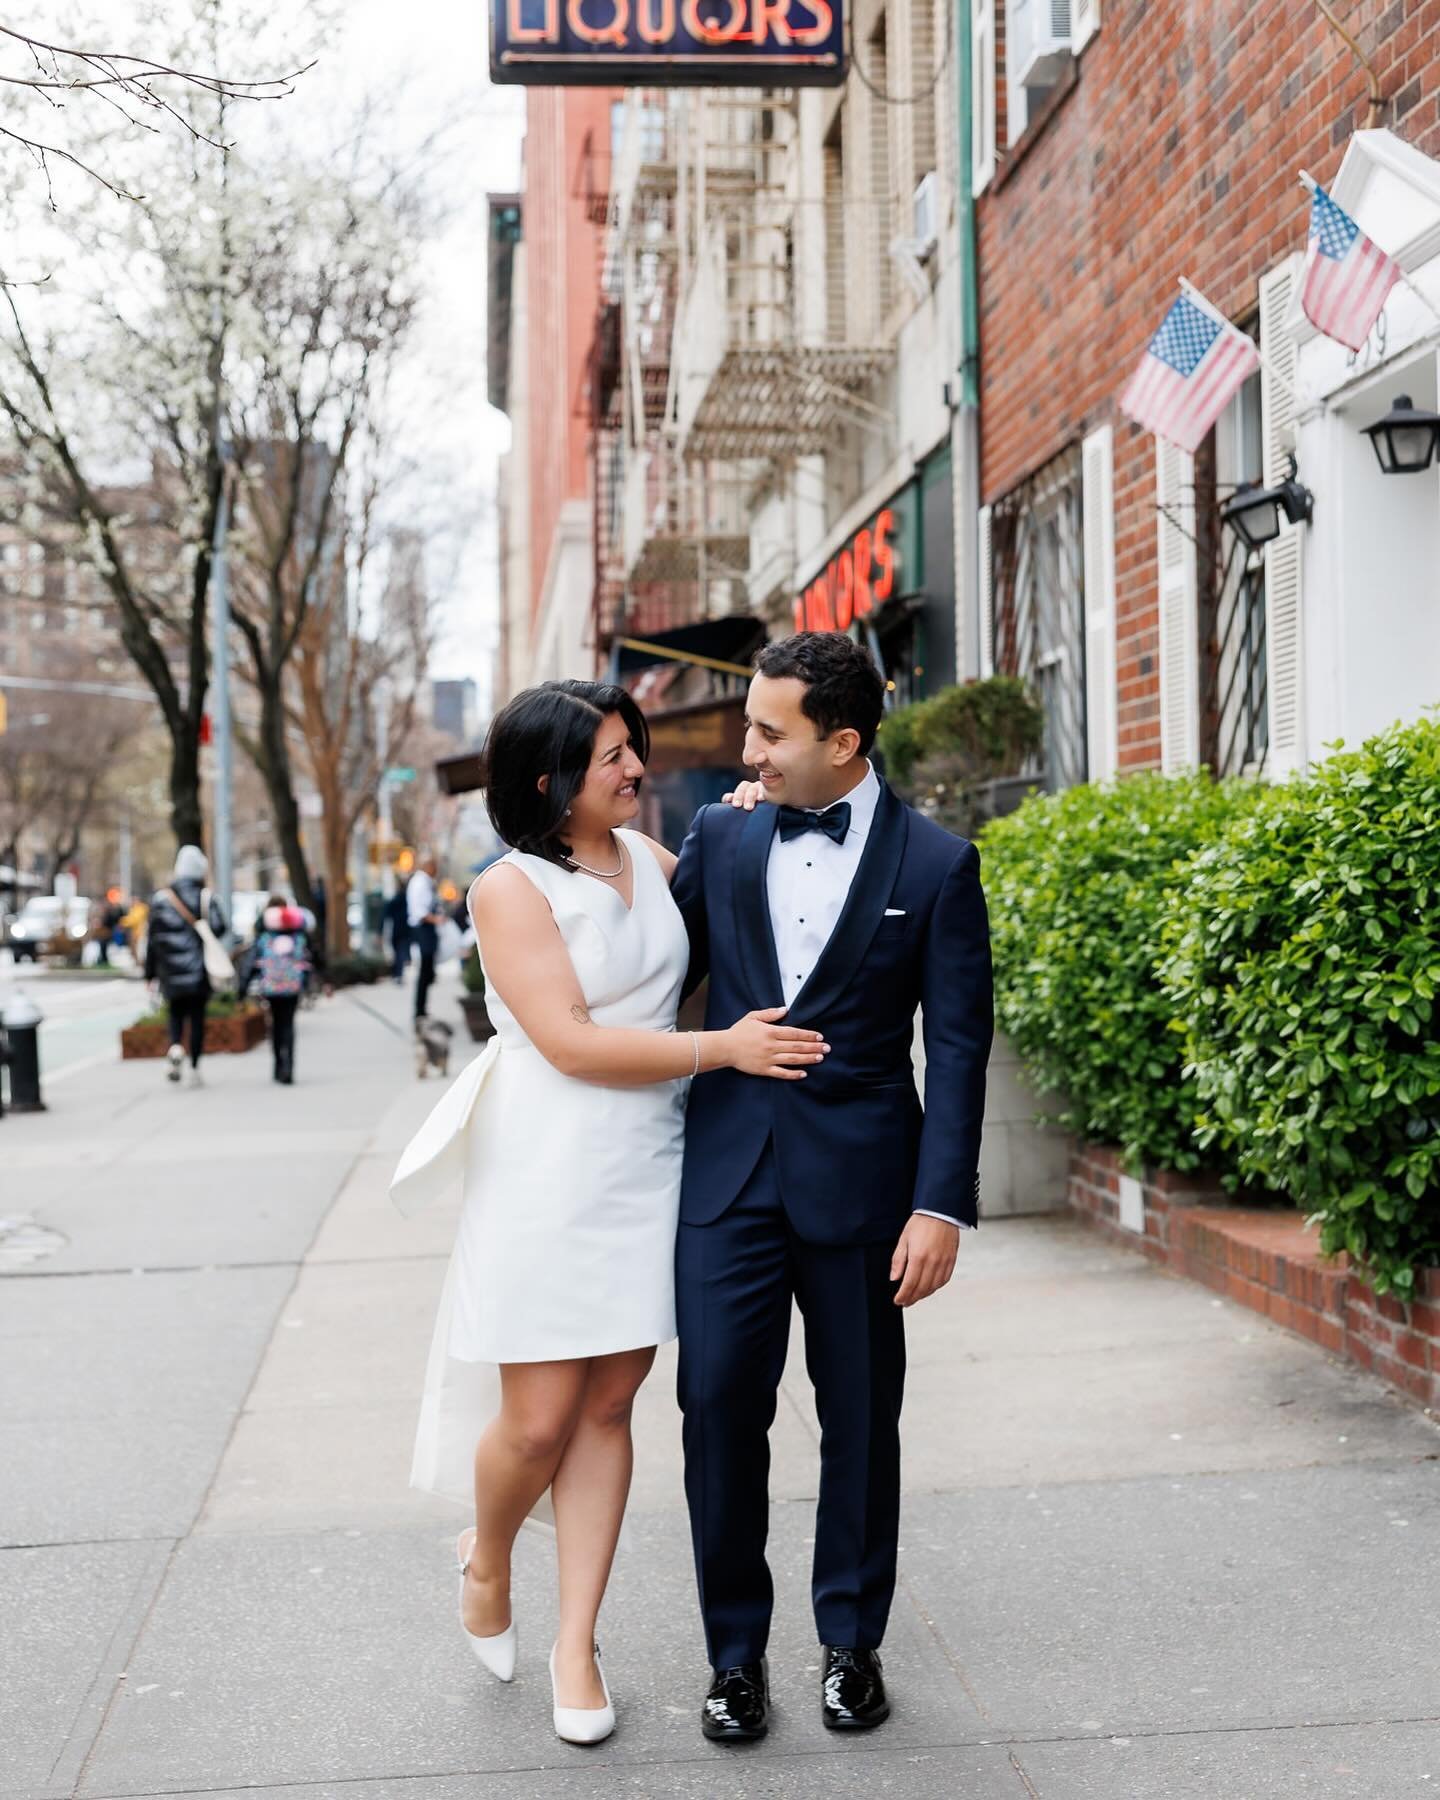 G+S decided to celebrate their wedding in a low-key way in a place they love. We ran around the West Village together on a sunny Friday afternoon before meeting their immediate families for a short ceremony they wrote for themselves in Washington Squ